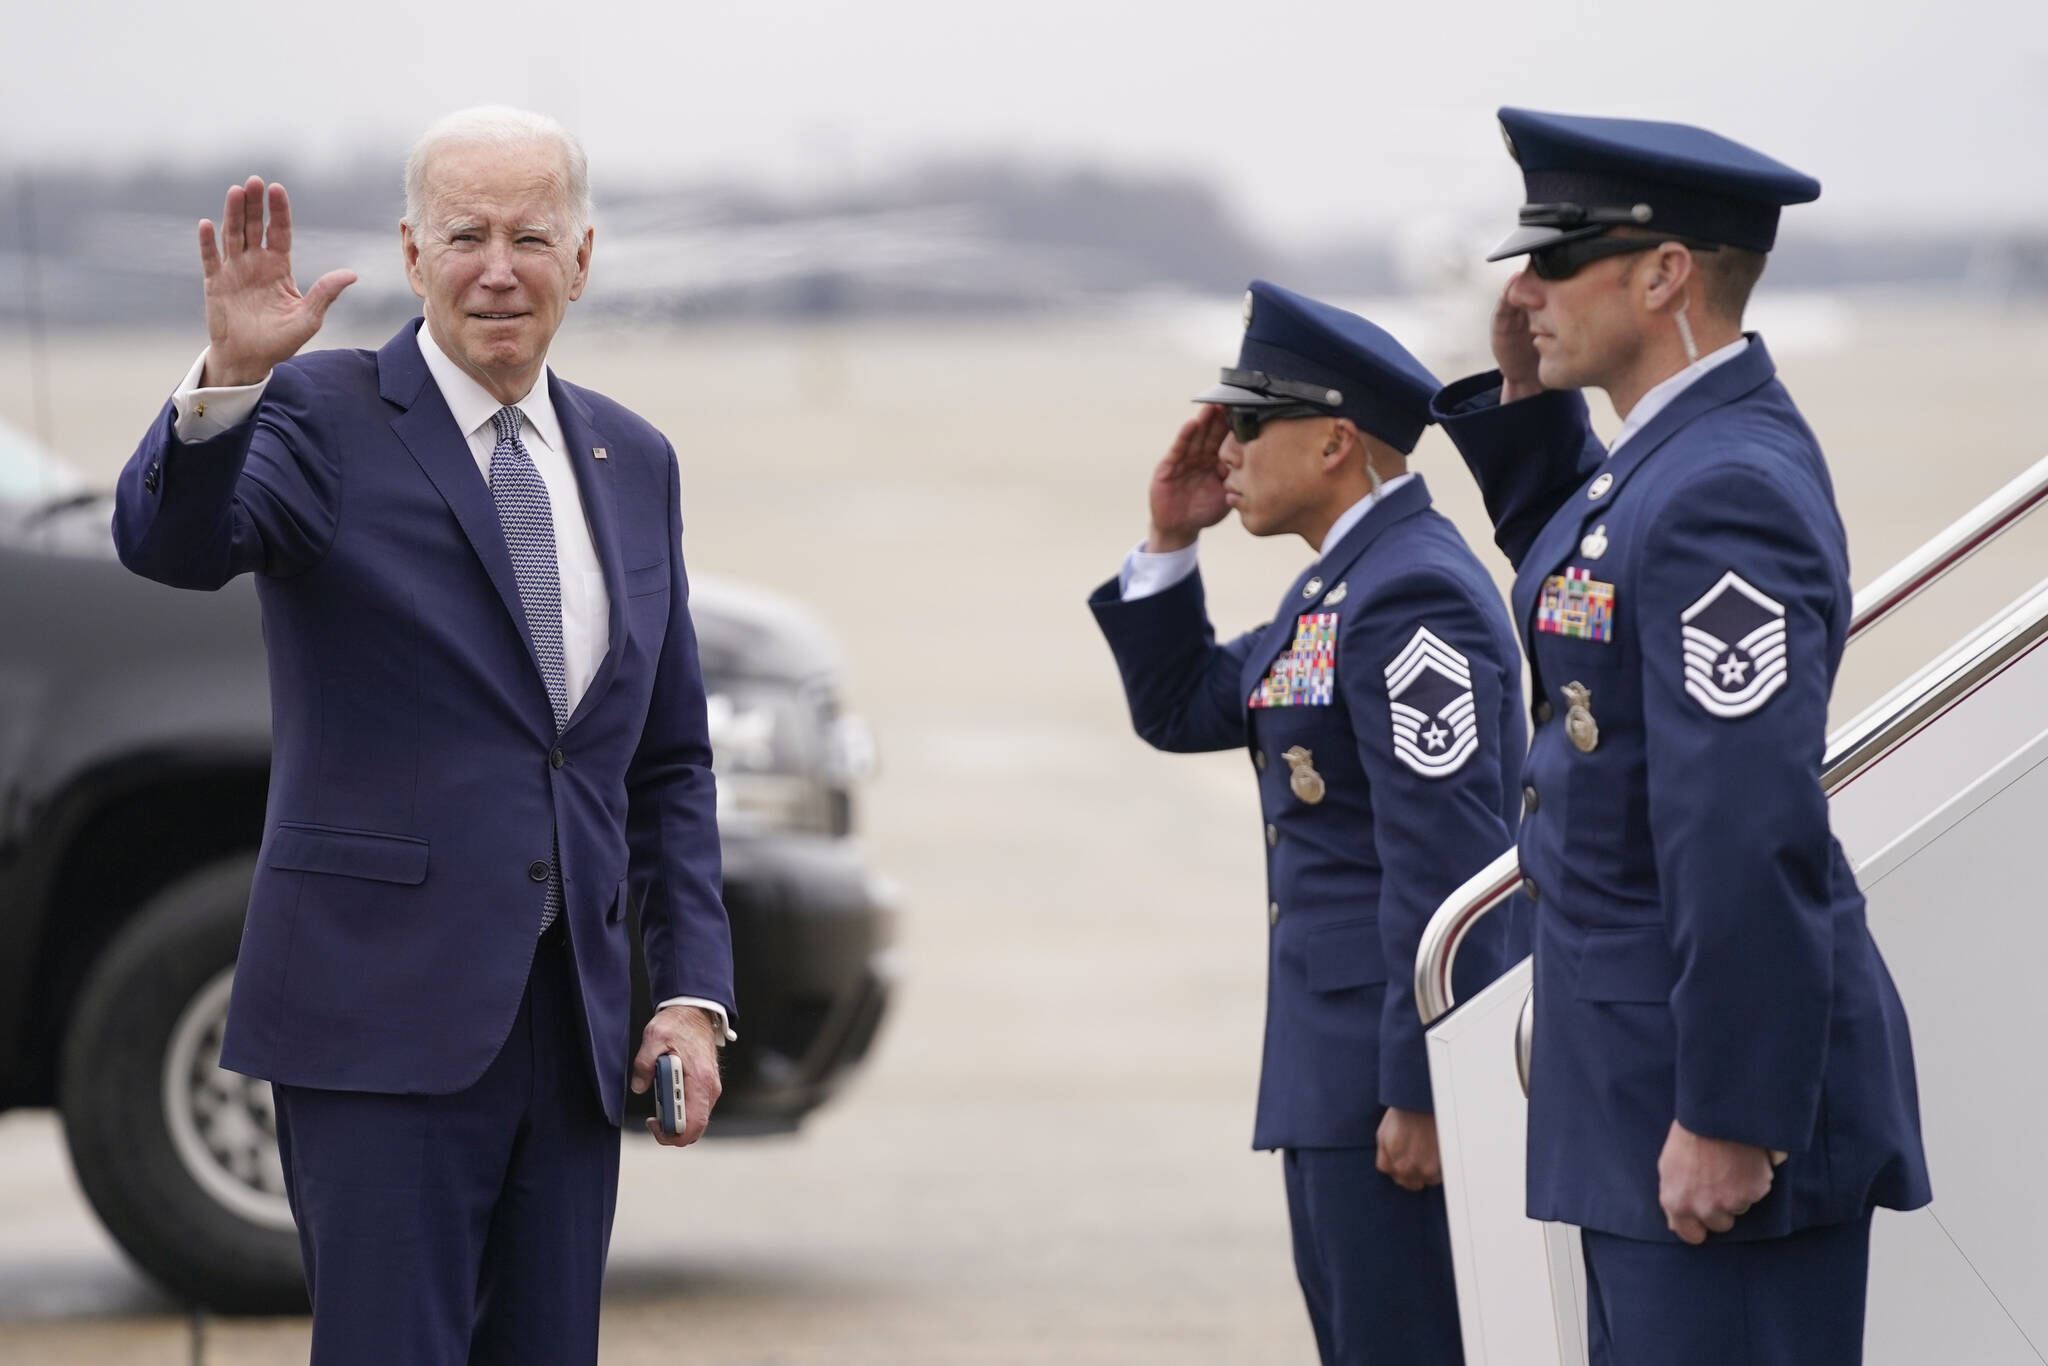 President Joe Biden waves before boarding Air Force One for a trip to San Diego to meet with British Prime Minister Rishi Sunak and Australian Prime Minister Anthony Albanese, Monday, March 13, 2023, in Andrews Air Force Base, Md. (AP Photo/Evan Vucci)